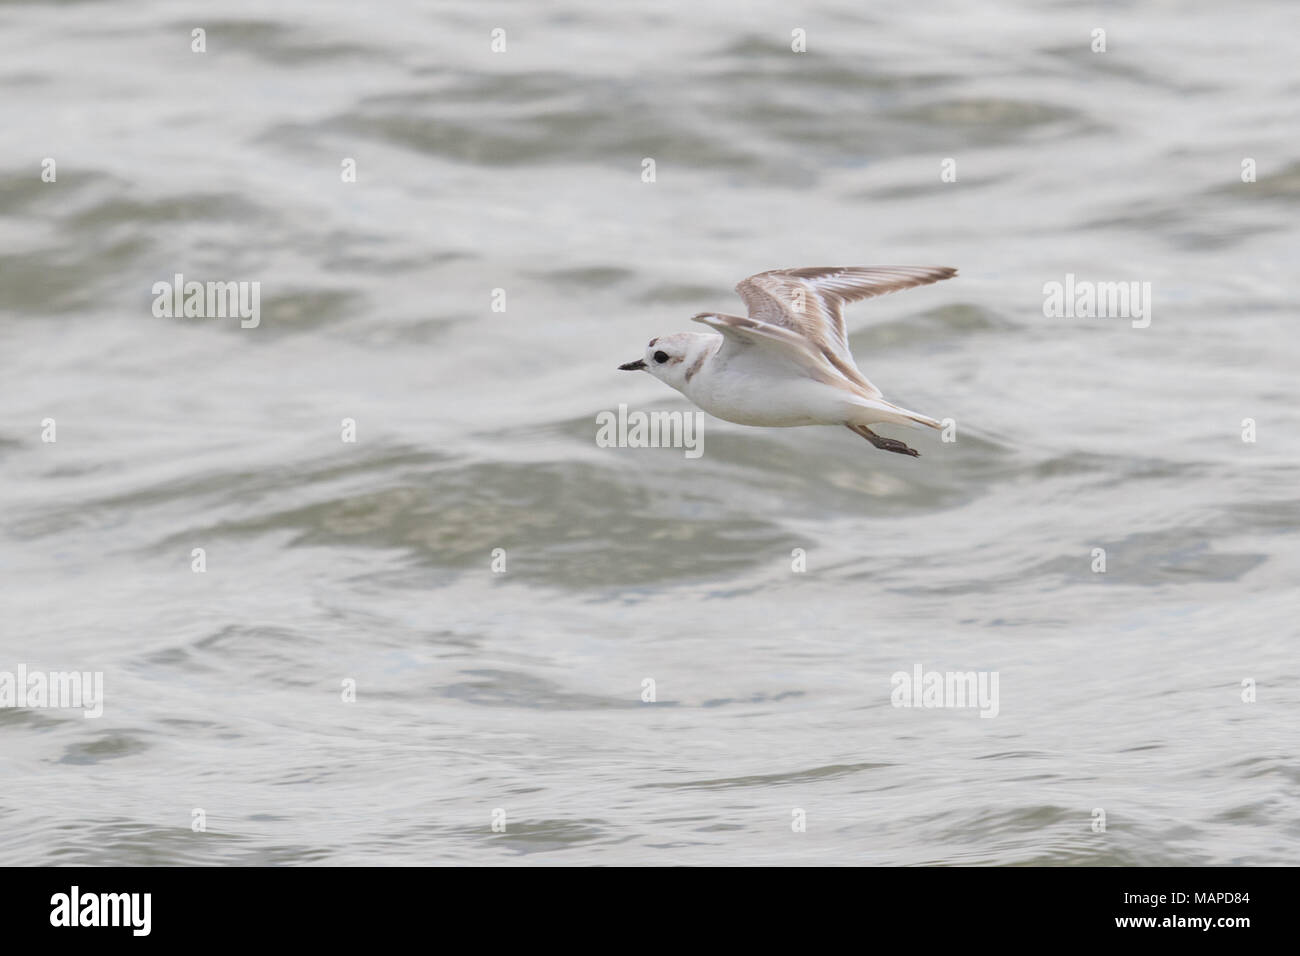 A snowy plover in flight. Stock Photo